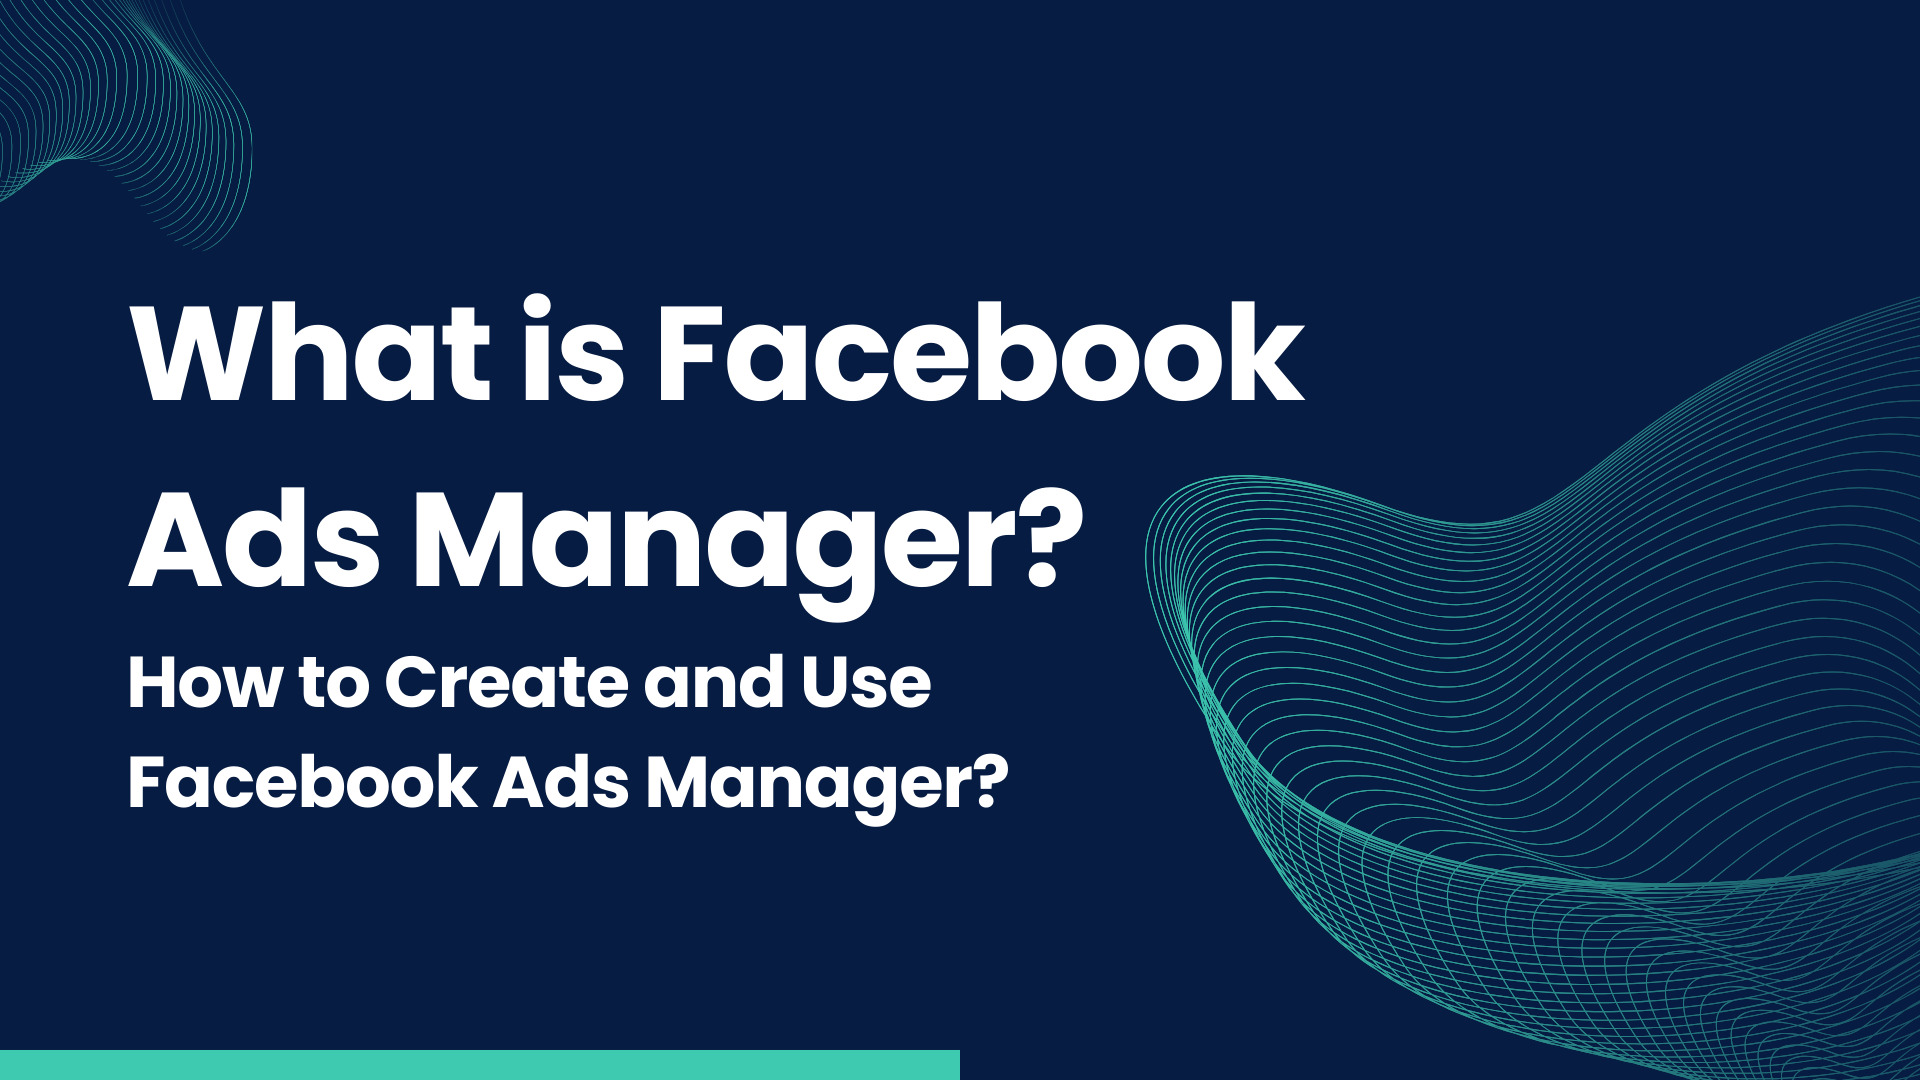 What is Facebook Ads Manager? How to Create and Use Facebook Ads Manager?